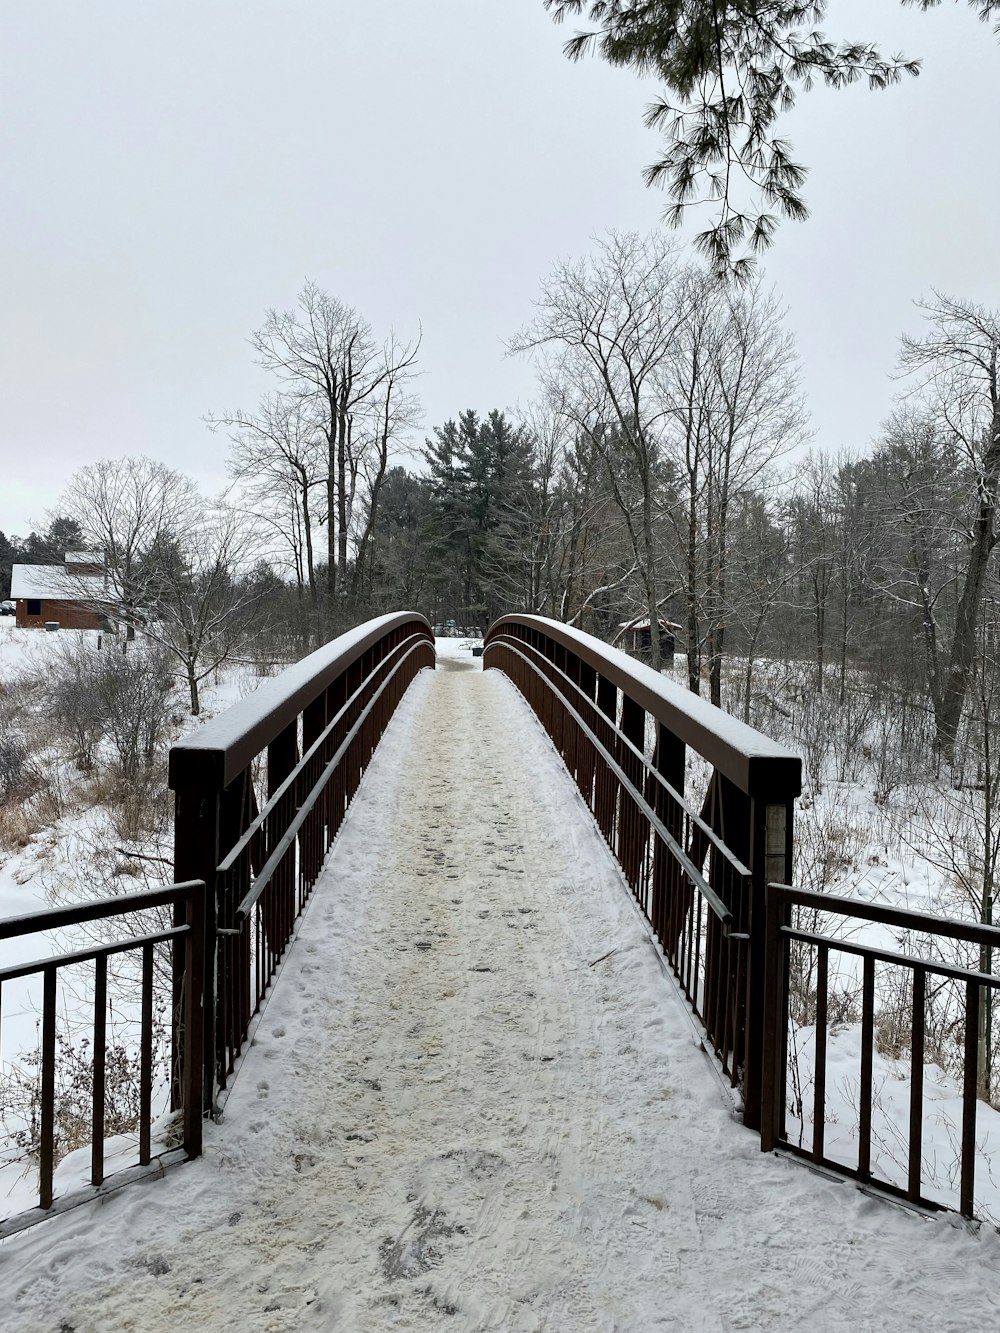 a wooden bridge with snow on the ground